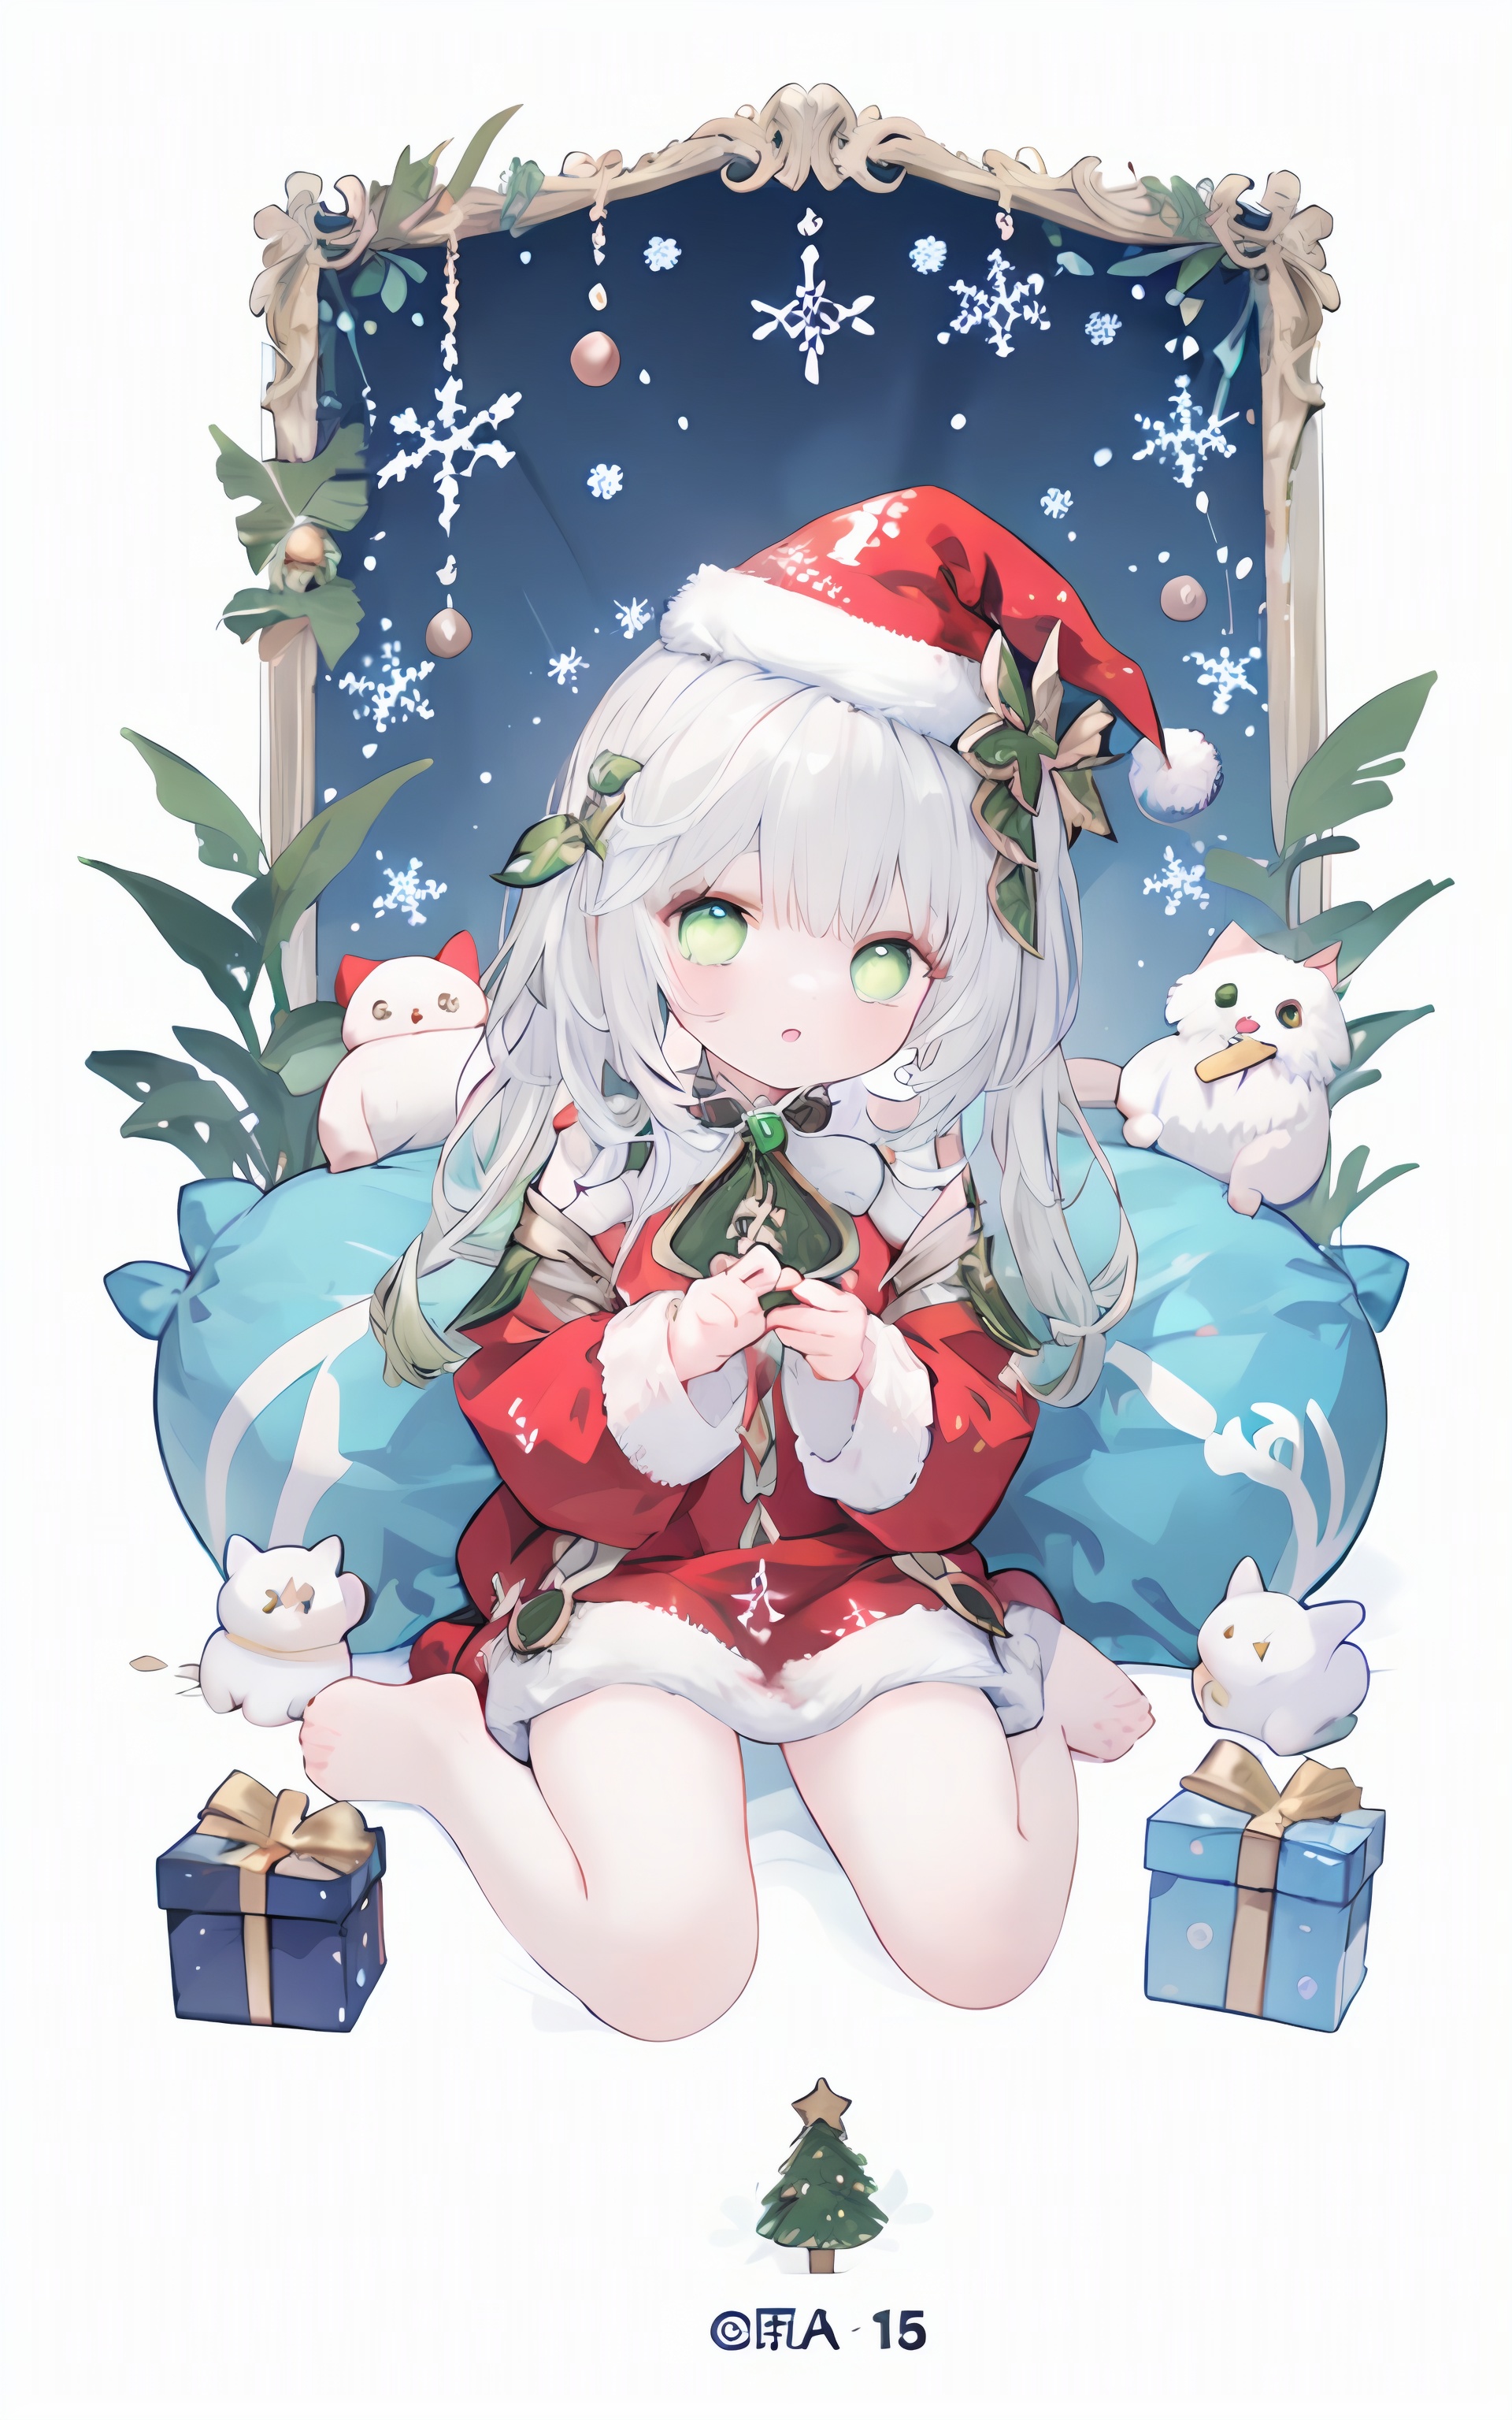  best_quality, extremely detailed details,loli,solo,1 girl,full_body,
pretty face,extremely delicate and beautiful girls,(beautiful detailed eyes),green_eyes,white_hair,very_long_hair,
Christmas,Christmas_tree,Christmas_dress,Santa's Hat,red_dress,
nahida (genshin impact), nahida (genshin impact)